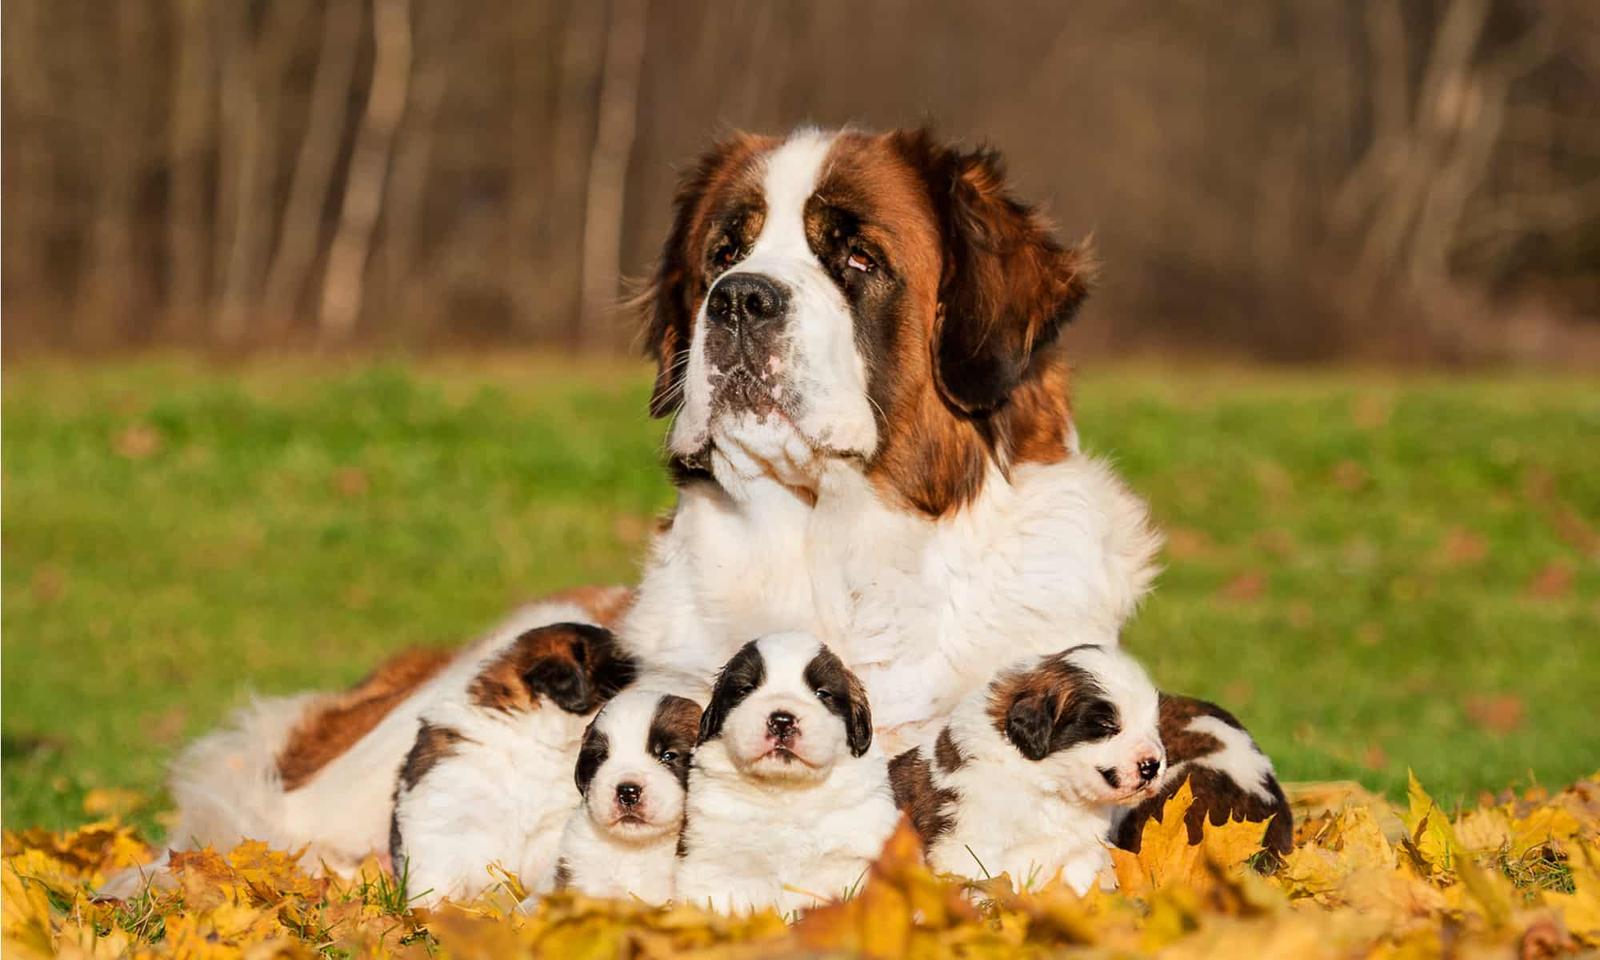 Which Big Dog And Small Dog Are You A Combination Of? 🐶 St. Saint Bernard